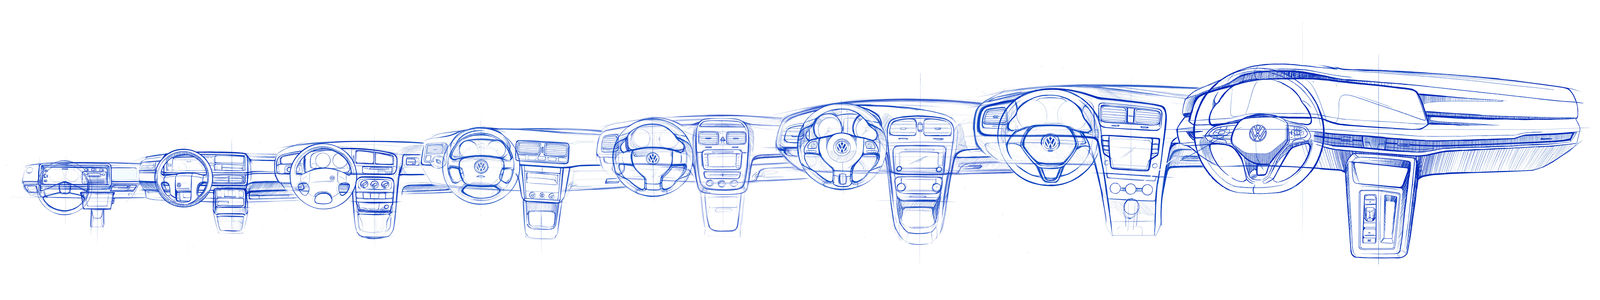 The all-new Golf (design sketch)